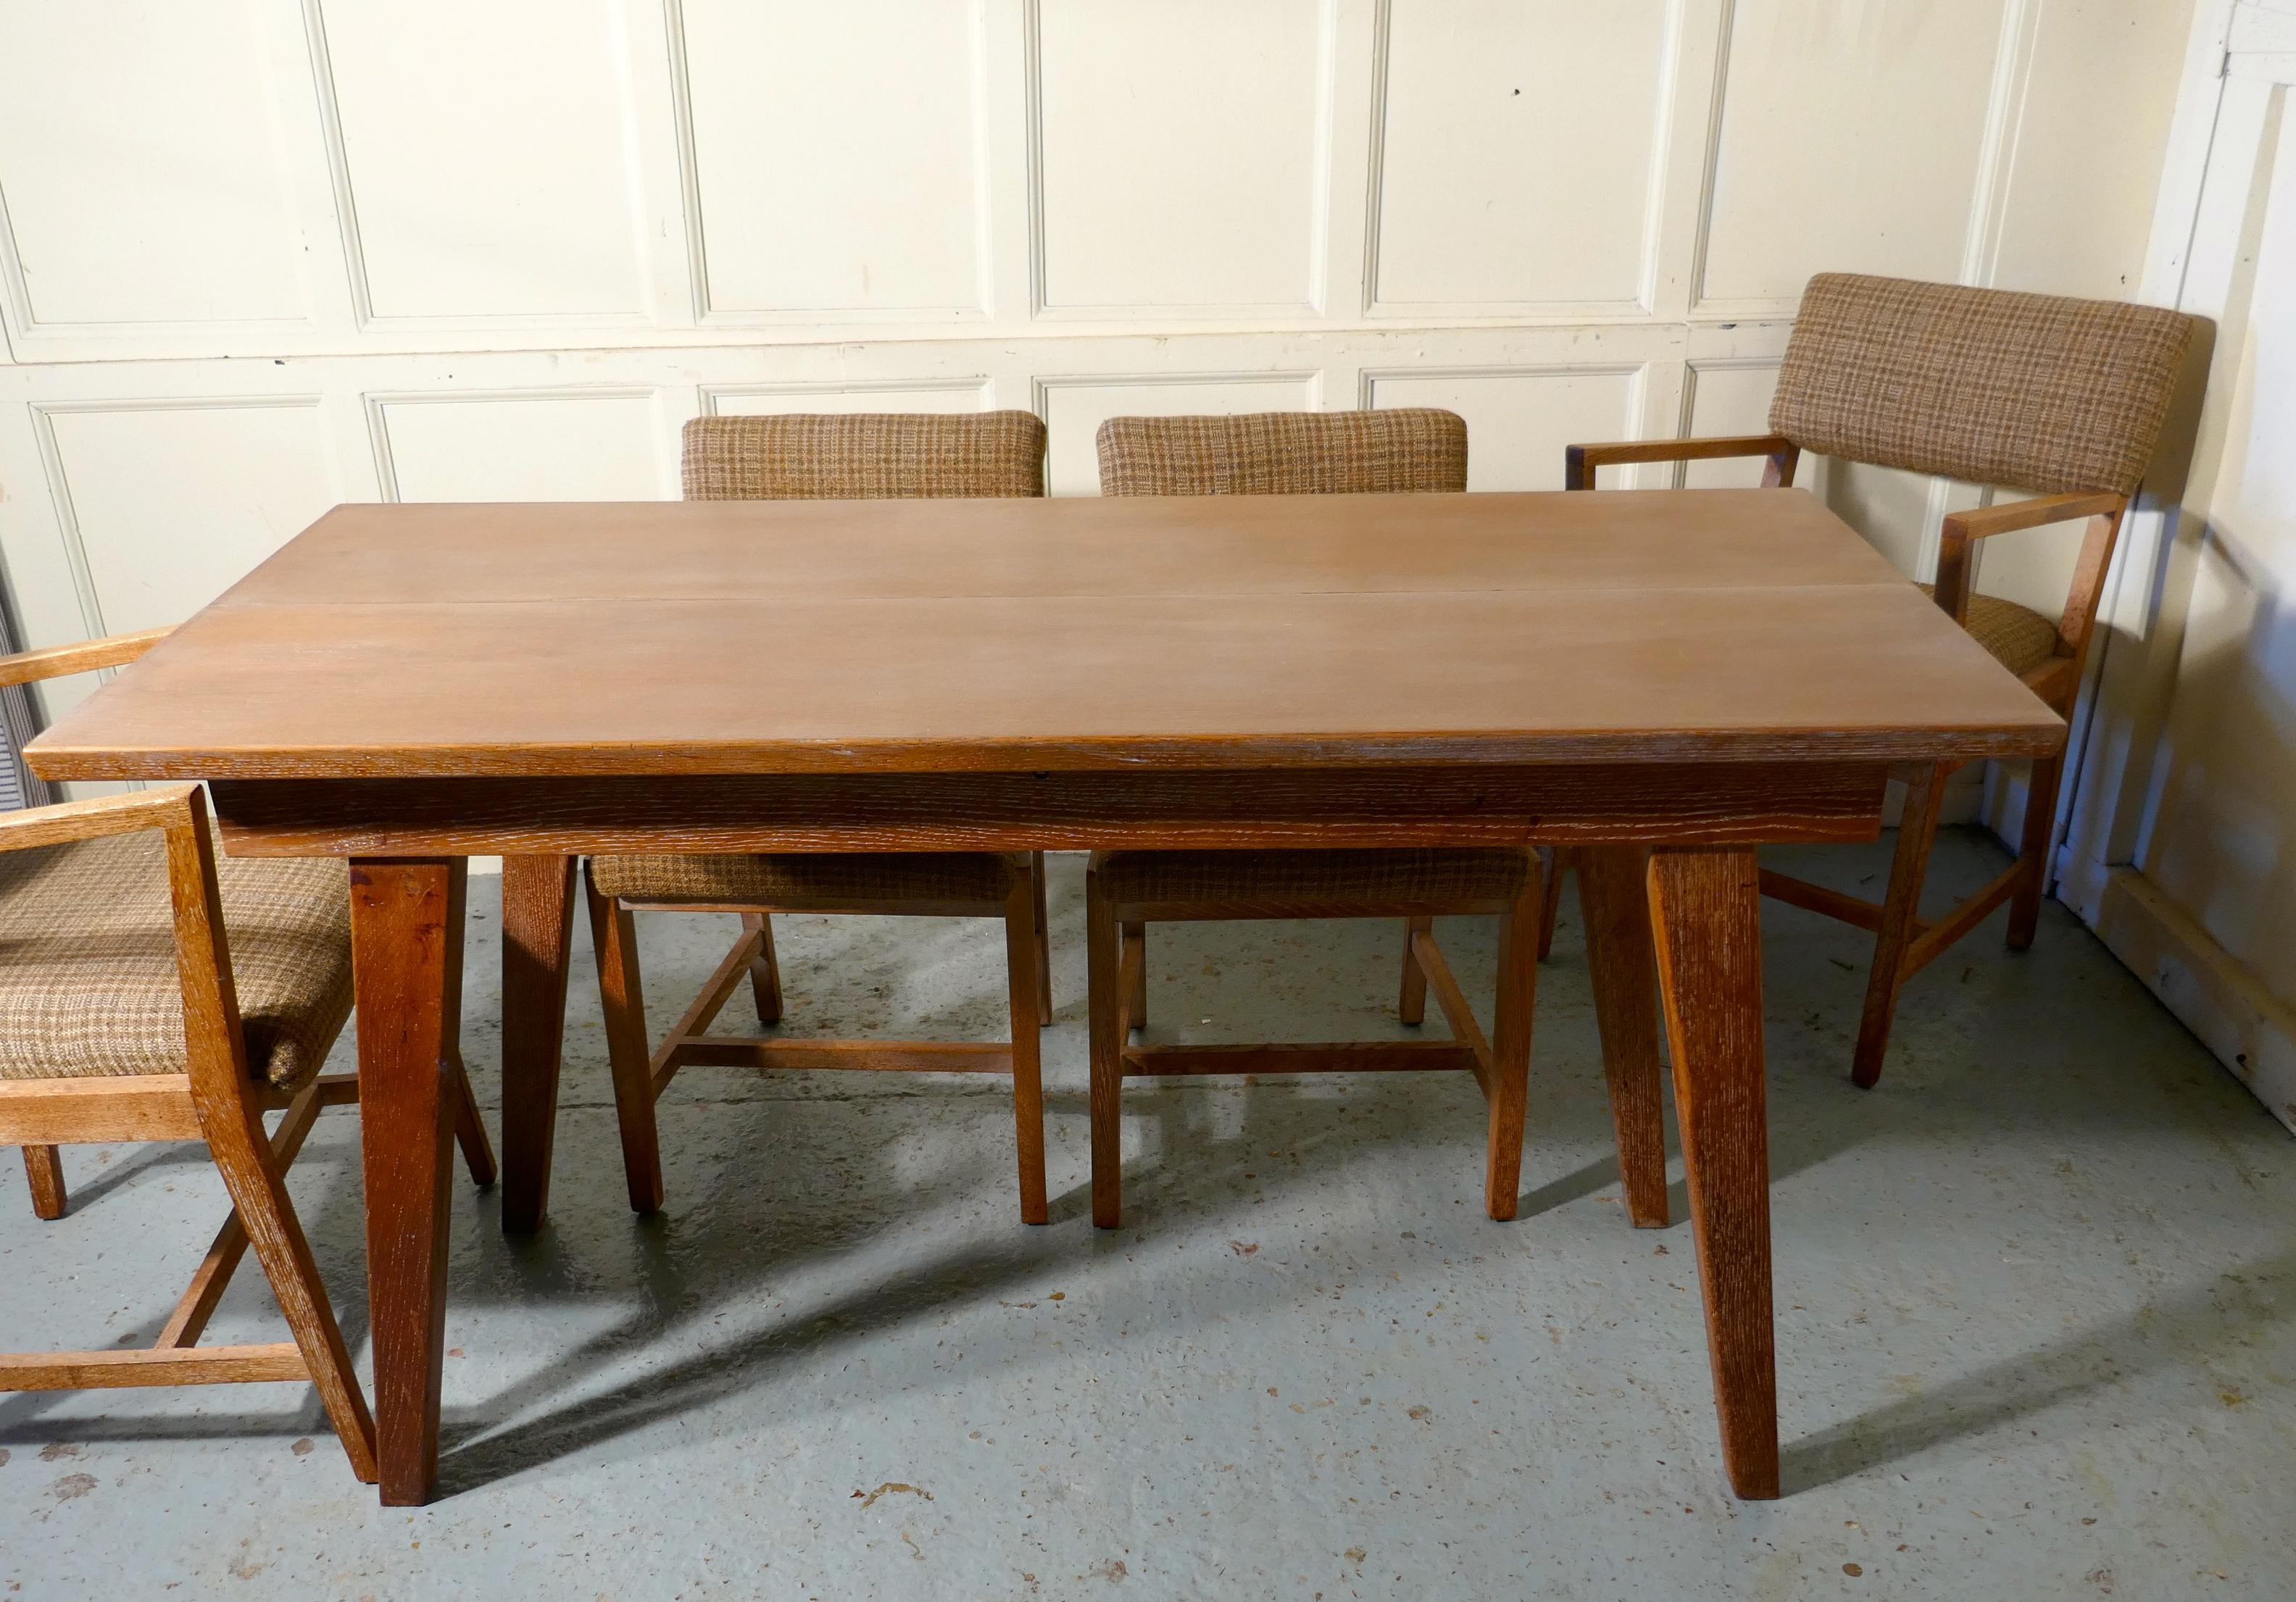 Limed Oak Extending Dining Table and set of 6 Chairs   In Good Condition For Sale In Chillerton, Isle of Wight